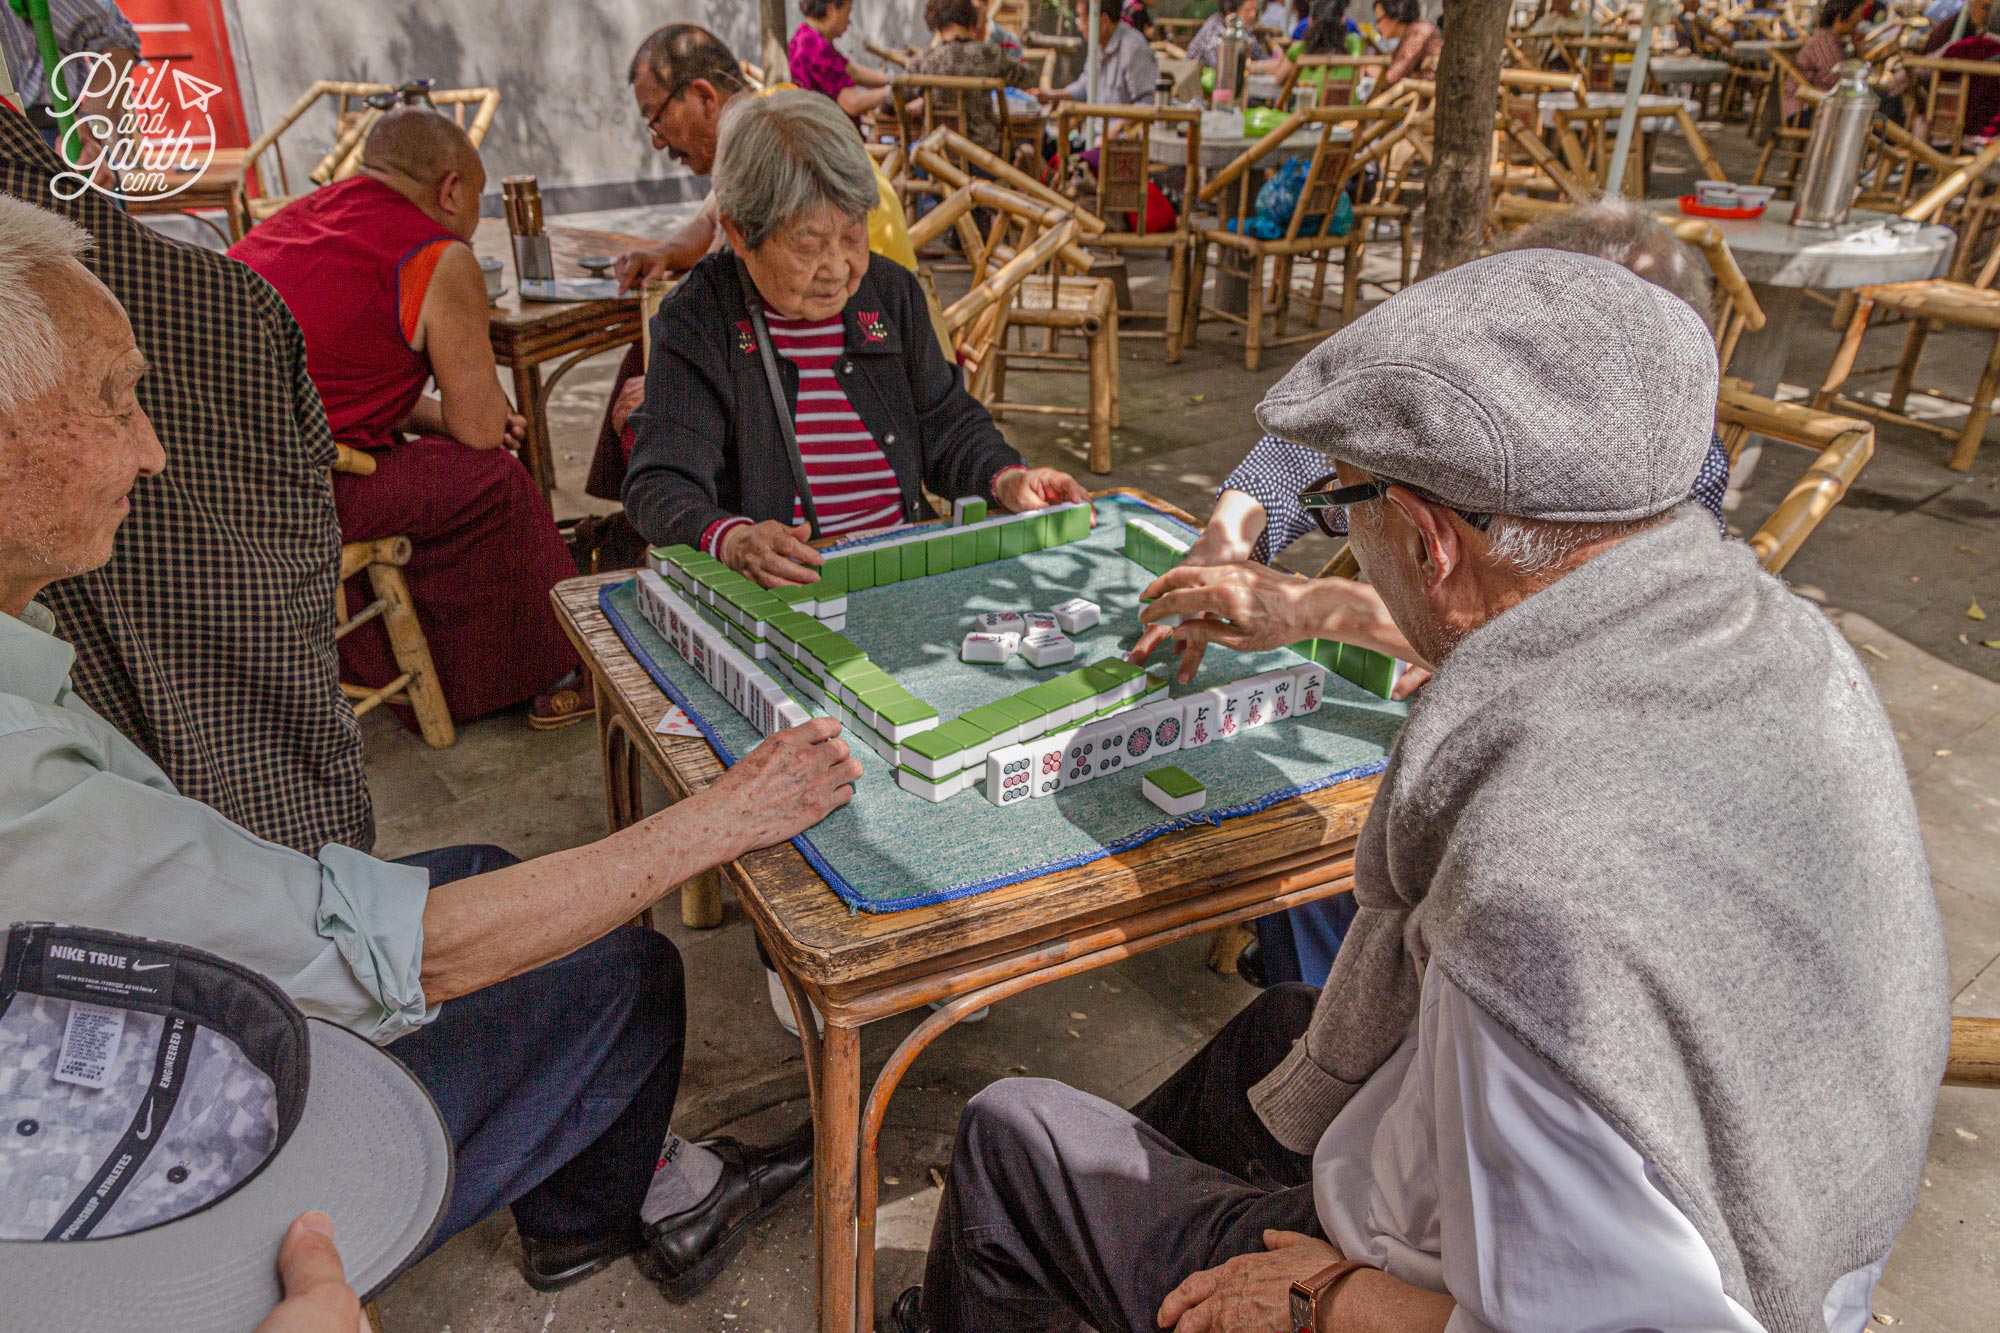 Friends playing Mahjong - a tile based game invented during the Qing dynasty